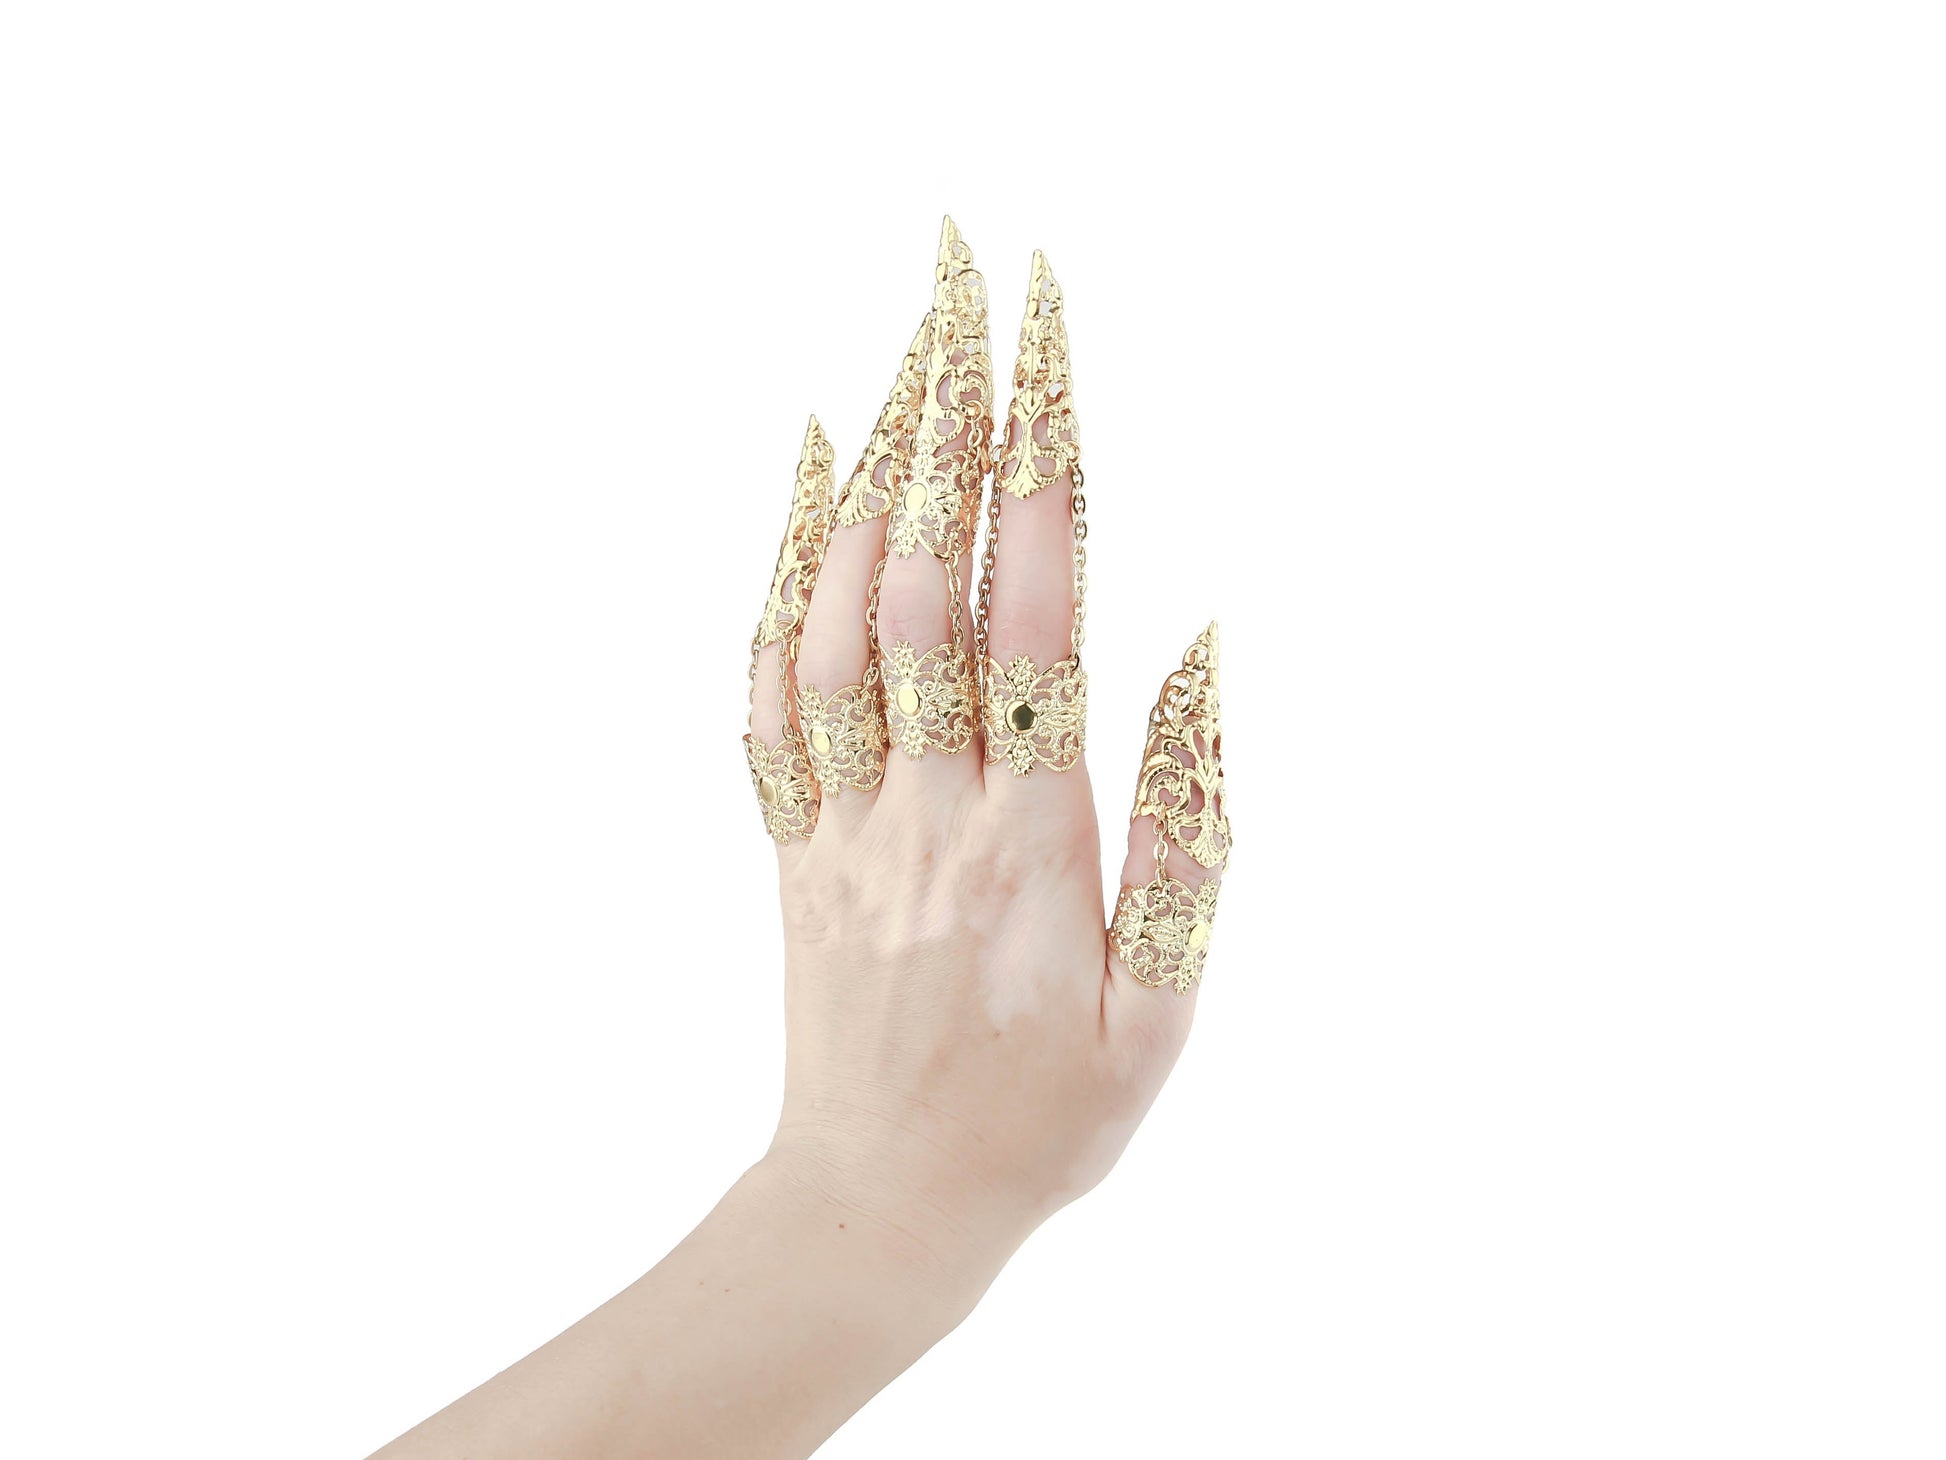 A hand is elegantly outfitted with a full set of Myril Jewels gold claw rings, showcasing a sophisticated neo-goth design. Each finger is graced with an ornate, gold filigree claw ring, exuding a dark-avantgarde and gothic-chic aesthetic. These lavish rings with claws are a perfect match for the alternative style lover, making a dramatic statement for Halloween, enhancing a minimal goth attire, or adding an edge to rave party and festival ensembles.